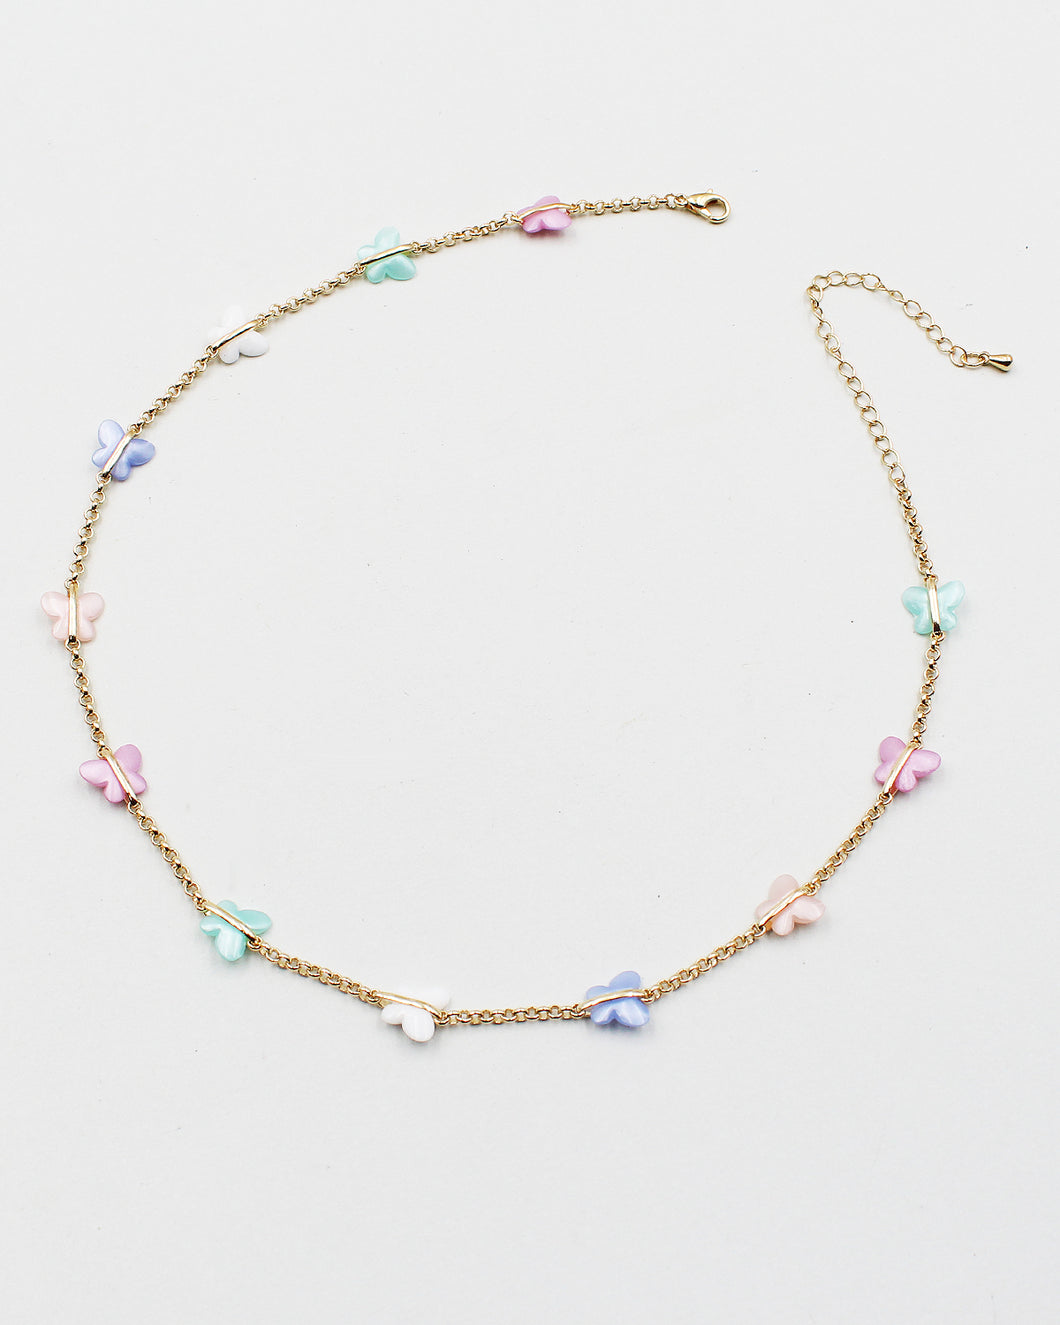 Resin Butterly Charm Choker Chain Necklace